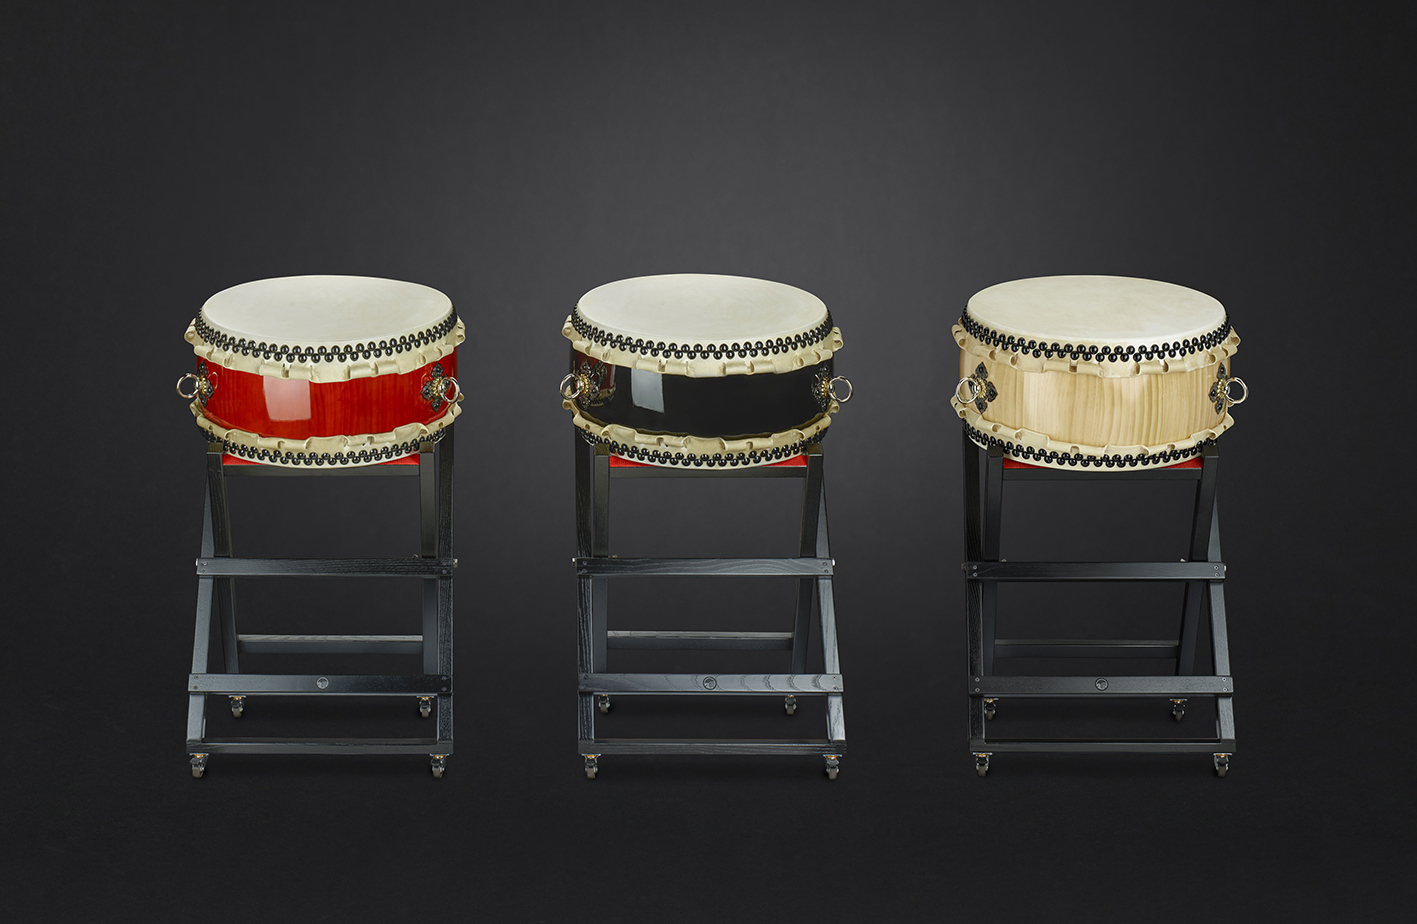 Hira-Daiko drums high-quality 48cm/h:25cm  (red-brown, shiny-black & nature)  with X-stand high  (695/195)